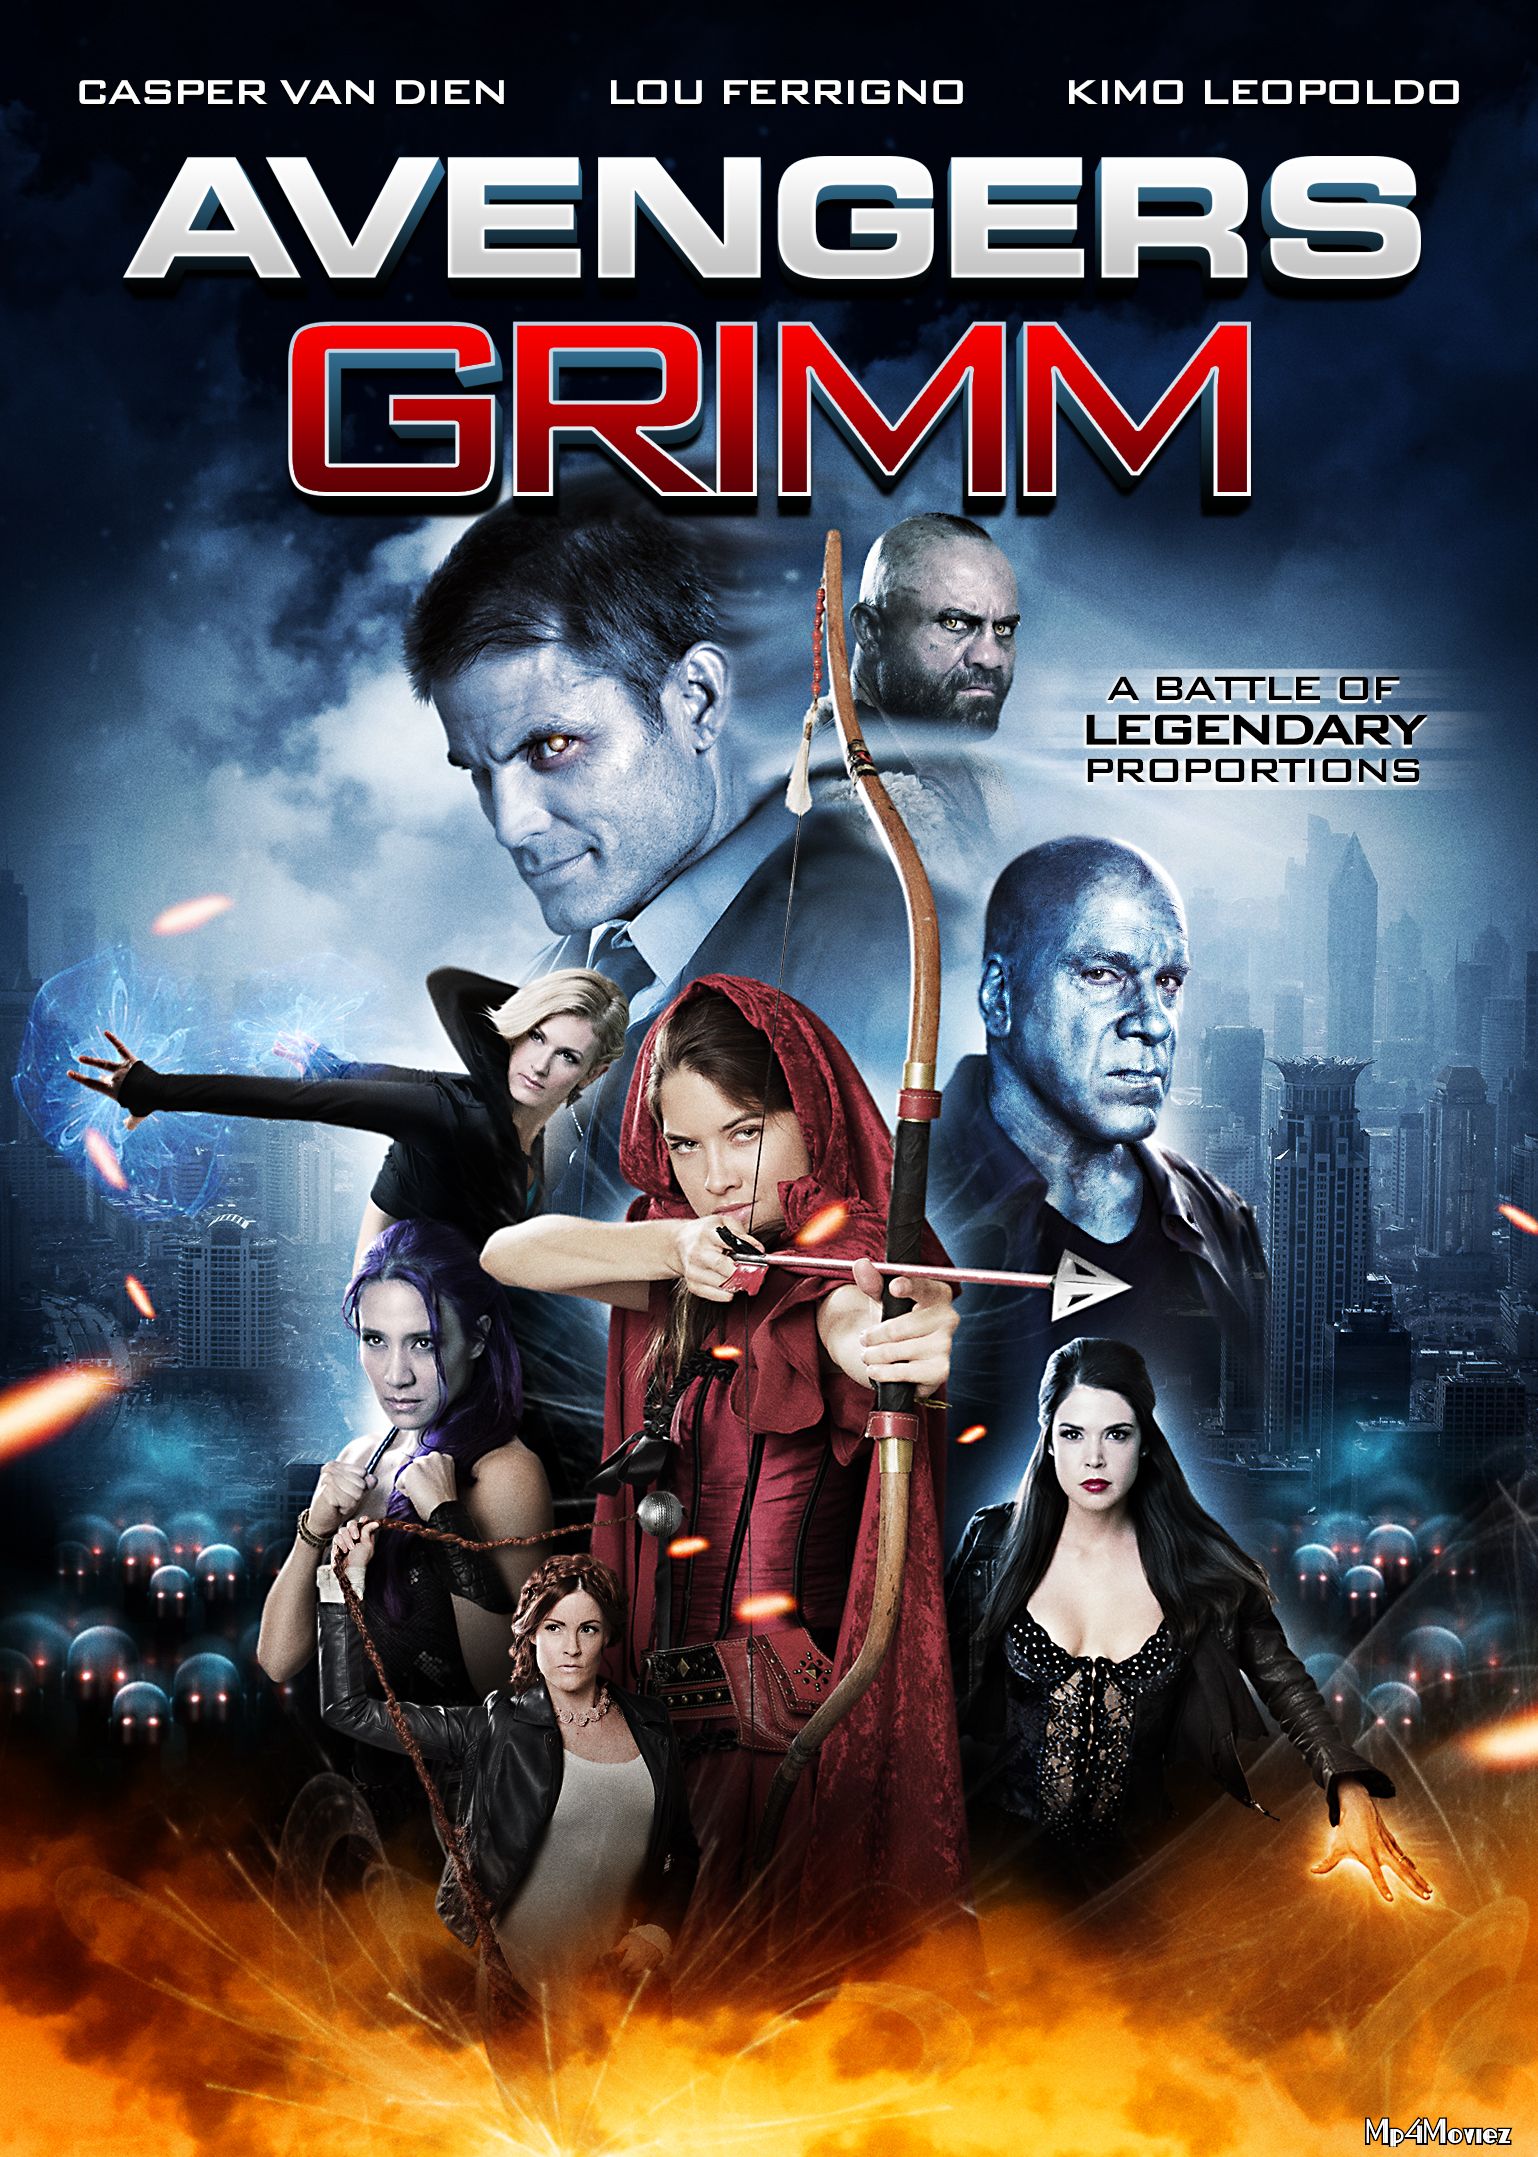 Avengers Grimm 2015 Hindi Dubbed Full Movie download full movie